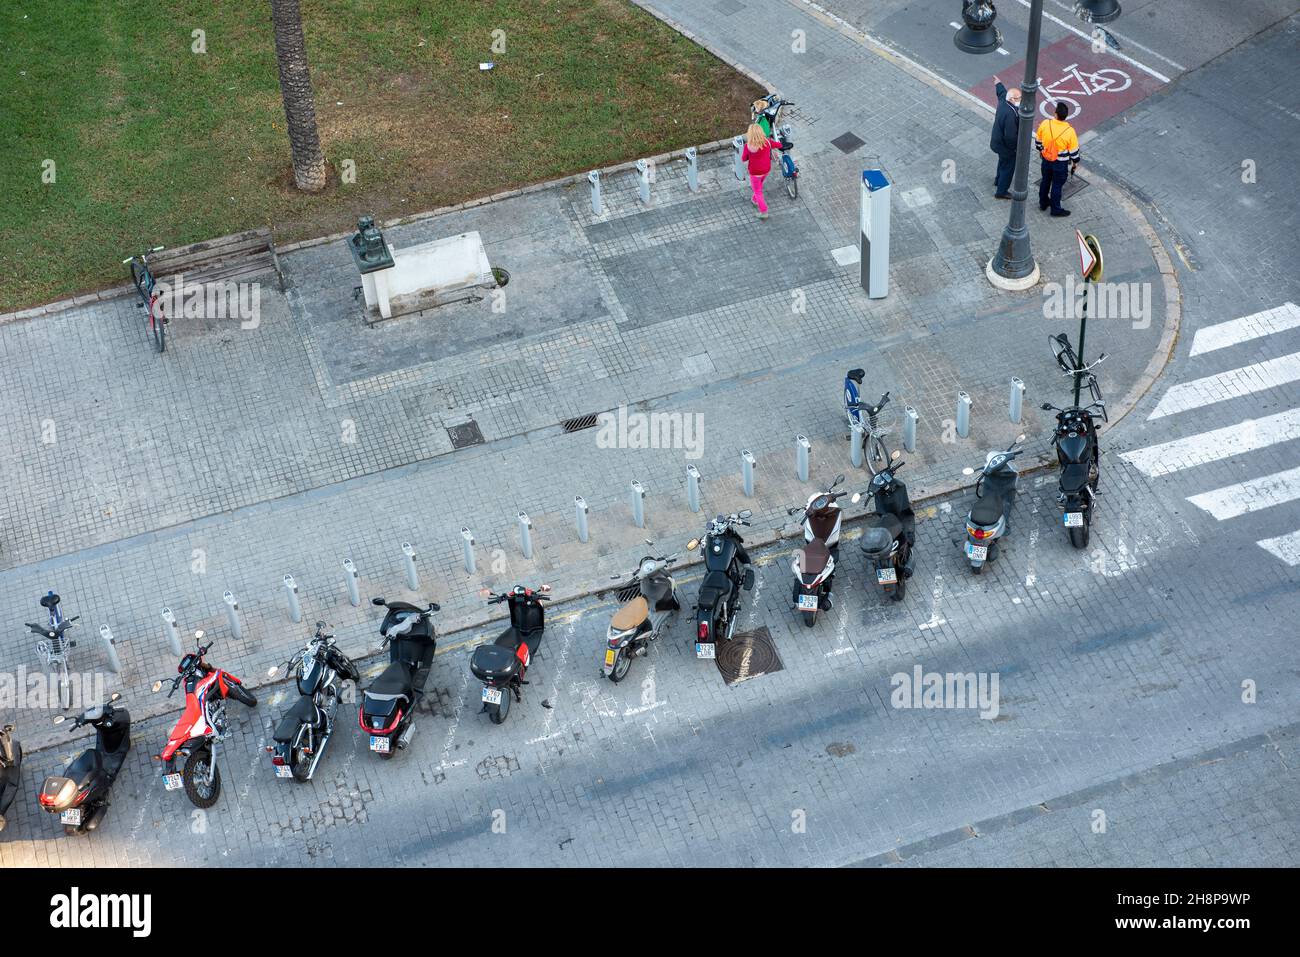 City parking of motorcycles and scooters Stock Photo